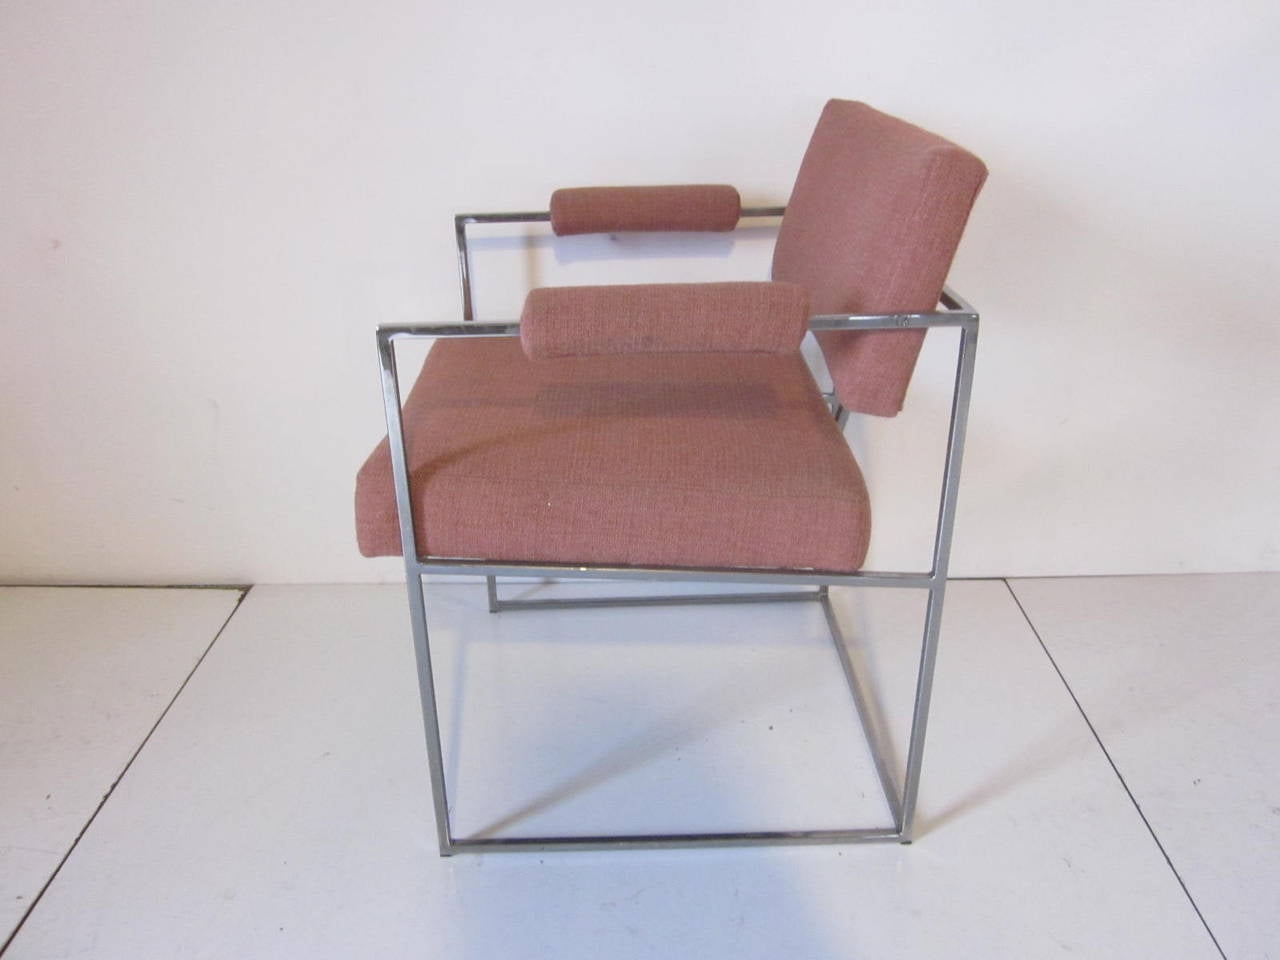 A set of eight Milo Baughman dining chairs with squared chromed tube frames, upholstered seat bottoms, backs and rolled arms. Manufactured by the Thayer Coggin Furniture company.